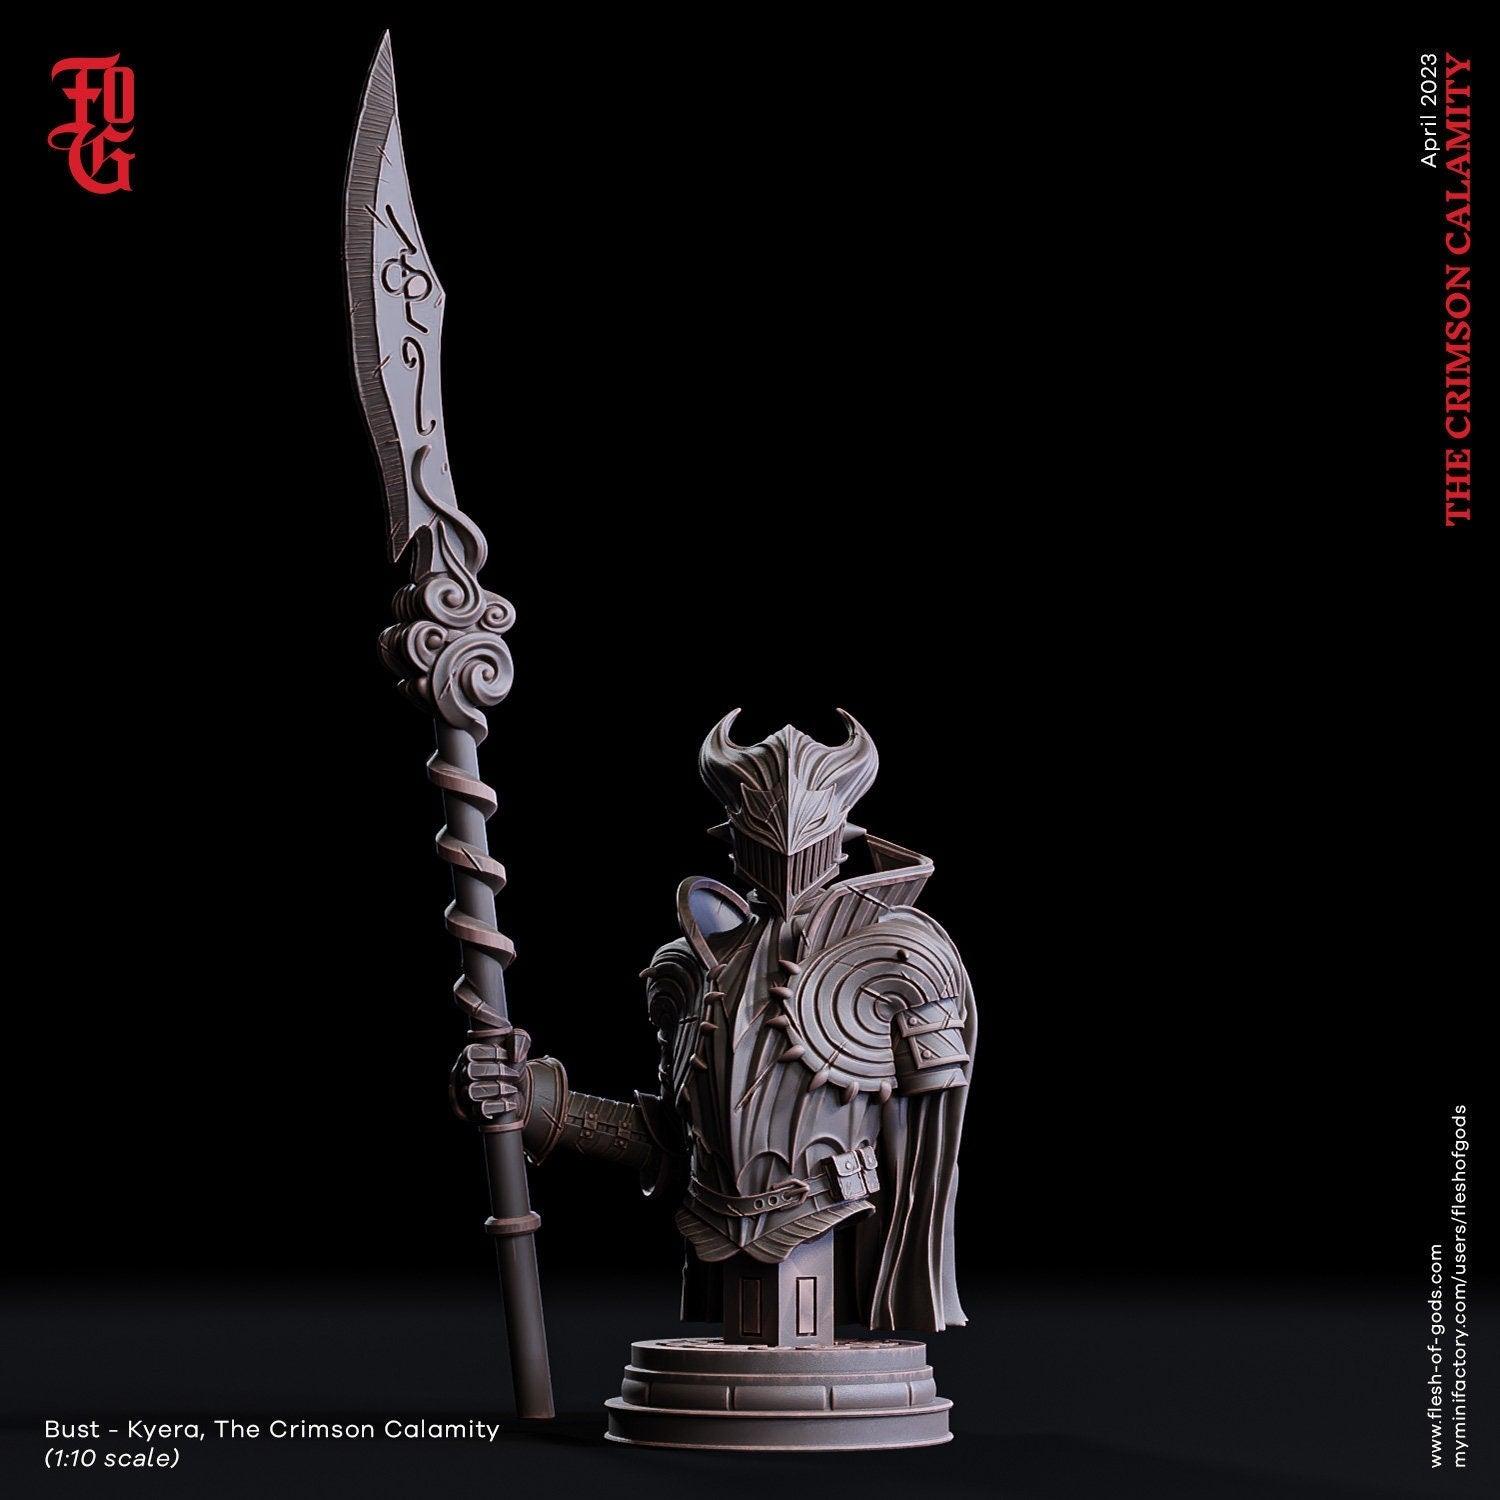 Bust of Human Female Warrior with spear | 25mm Base 75mm Scale and Bust | DnD Miniature Dungeons and Dragons DnD 5e fighter miniature paladin - Plague Miniatures shop for DnD Miniatures